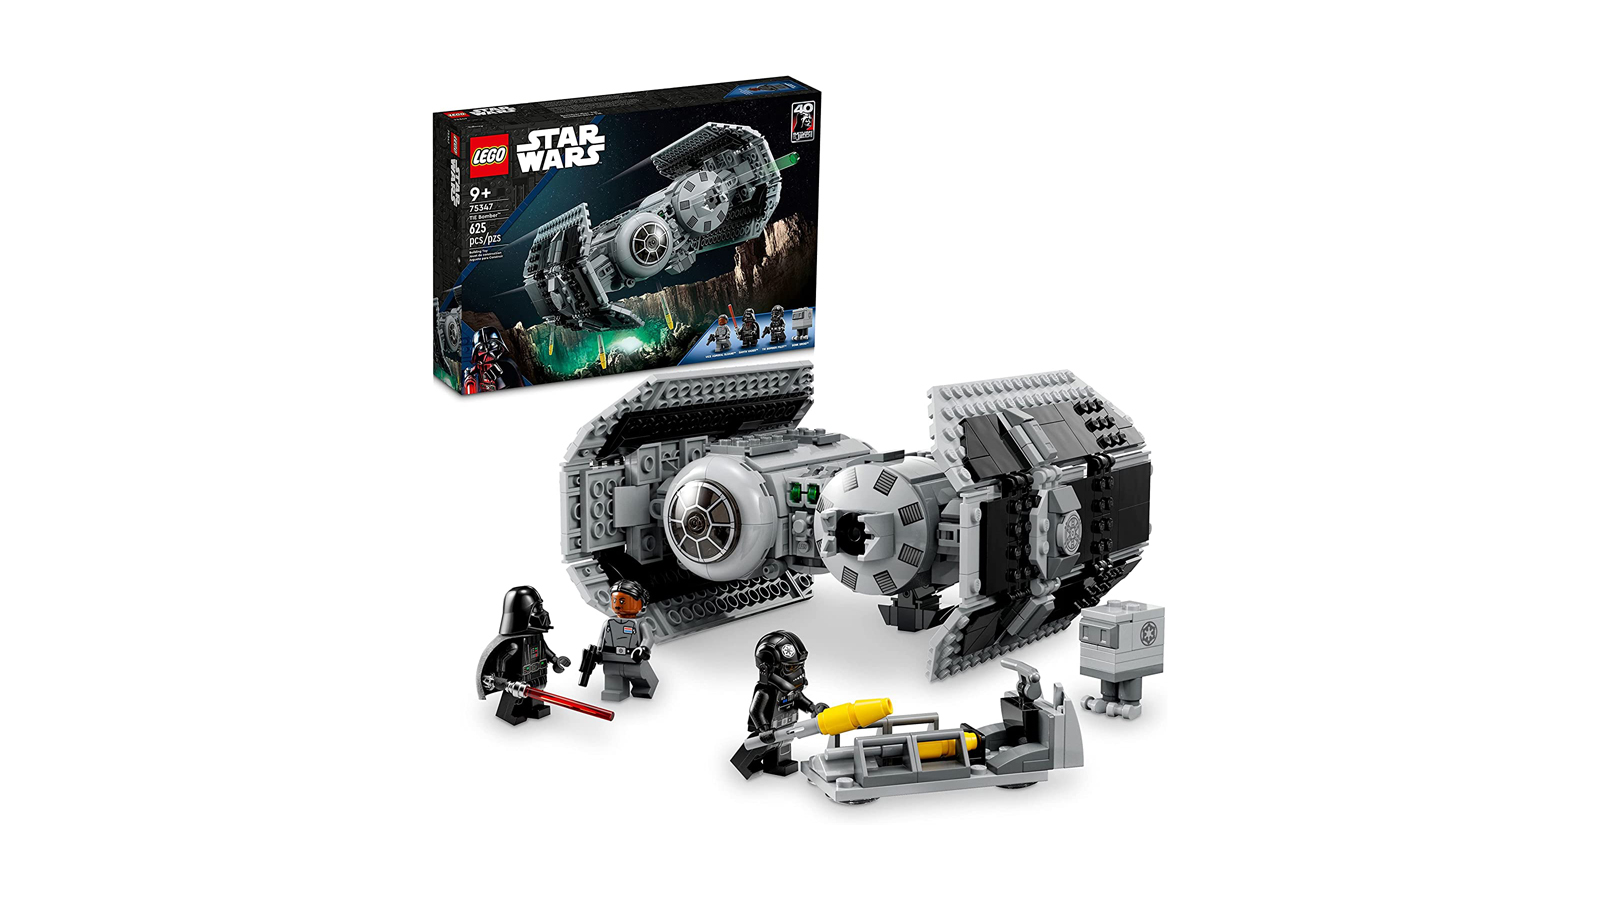 Daily Deals: Save on Star Wars Lightsabers, LEGO Star Wars UCS